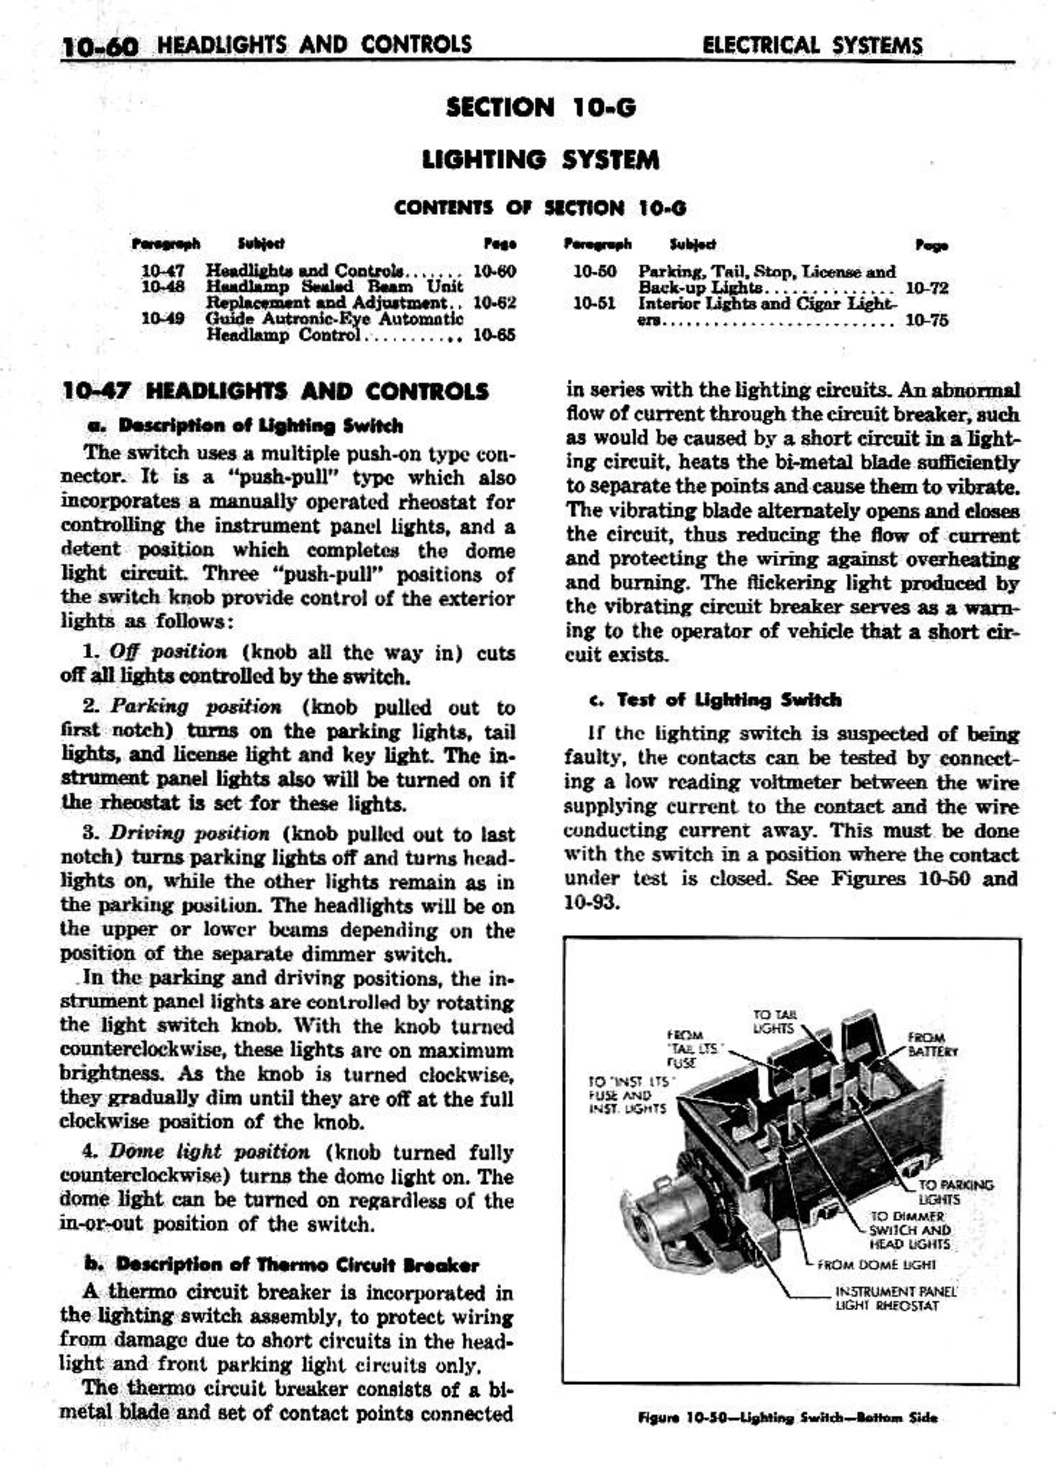 n_11 1959 Buick Shop Manual - Electrical Systems-060-060.jpg